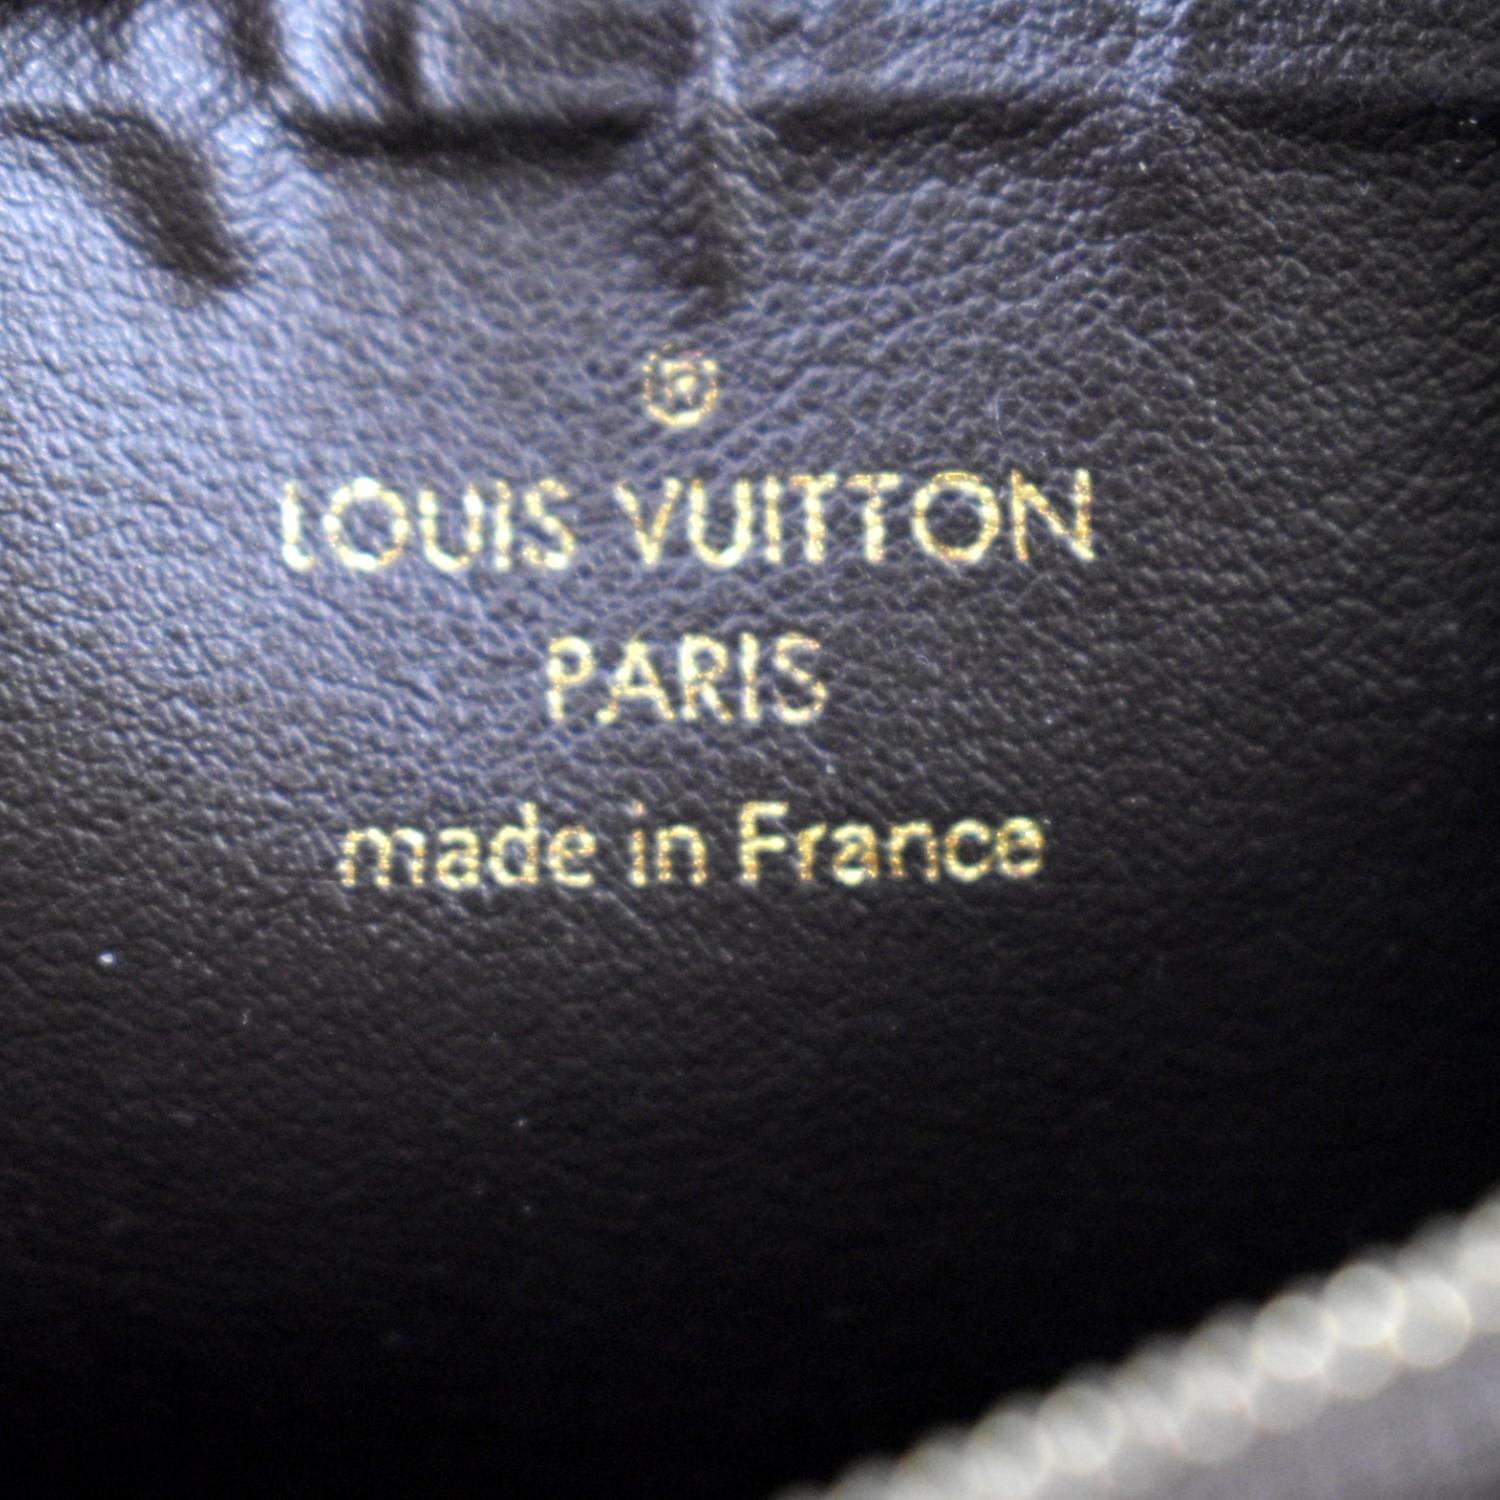 Where are Authentic Louis Vuitton Items Made In China